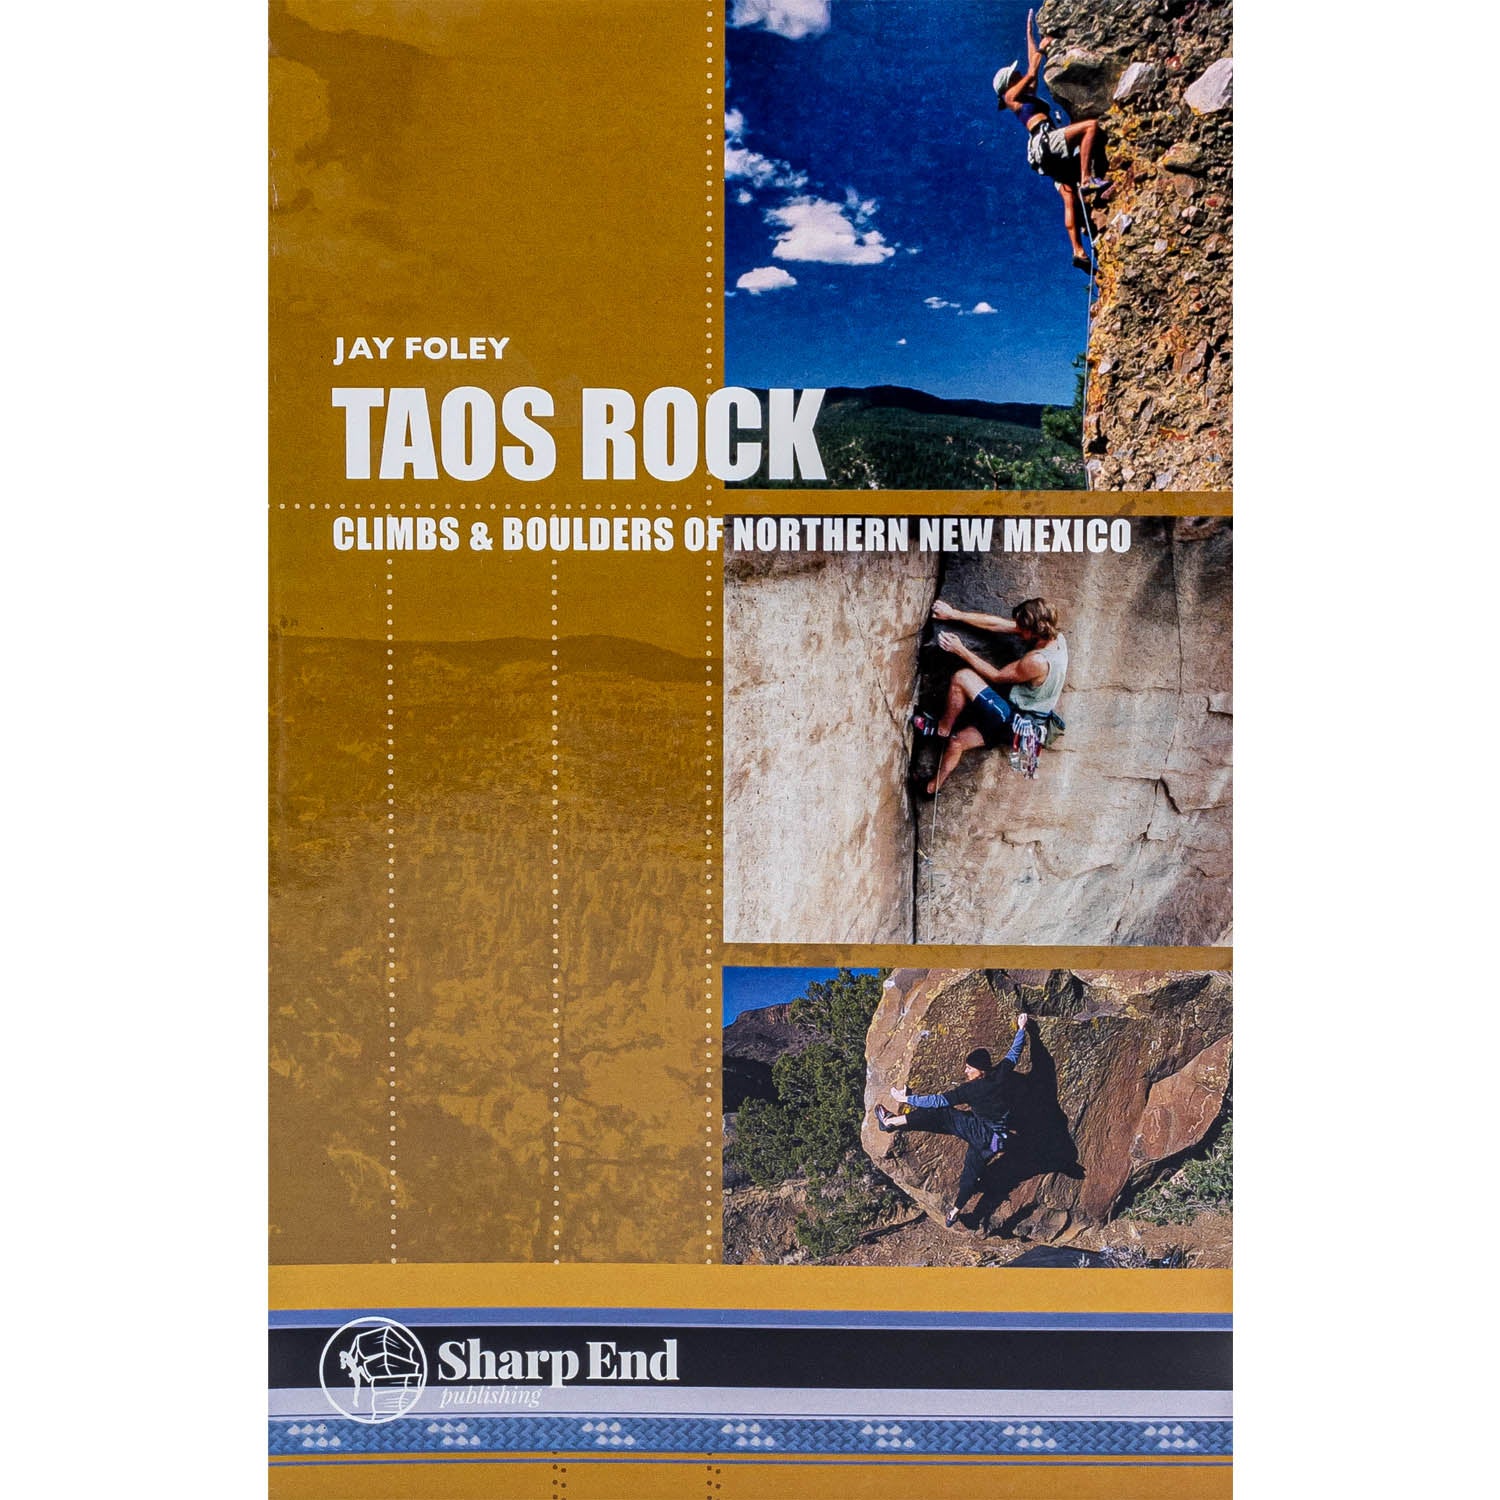 Taos Rock : Climbs & Boulders of Northern New Mexico